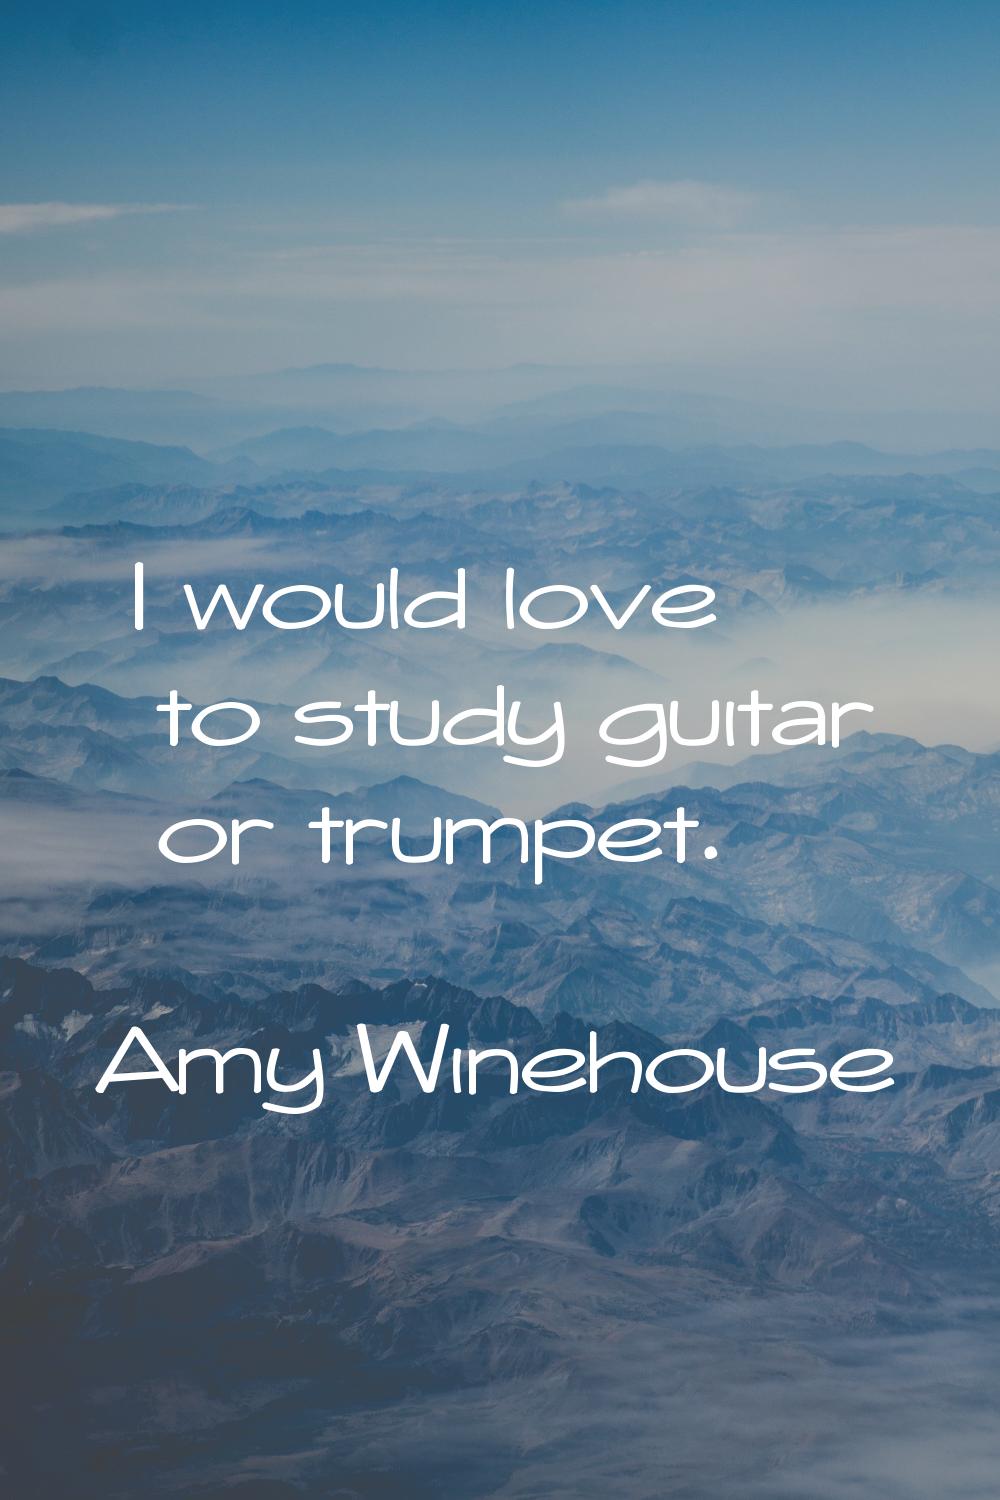 I would love to study guitar or trumpet.